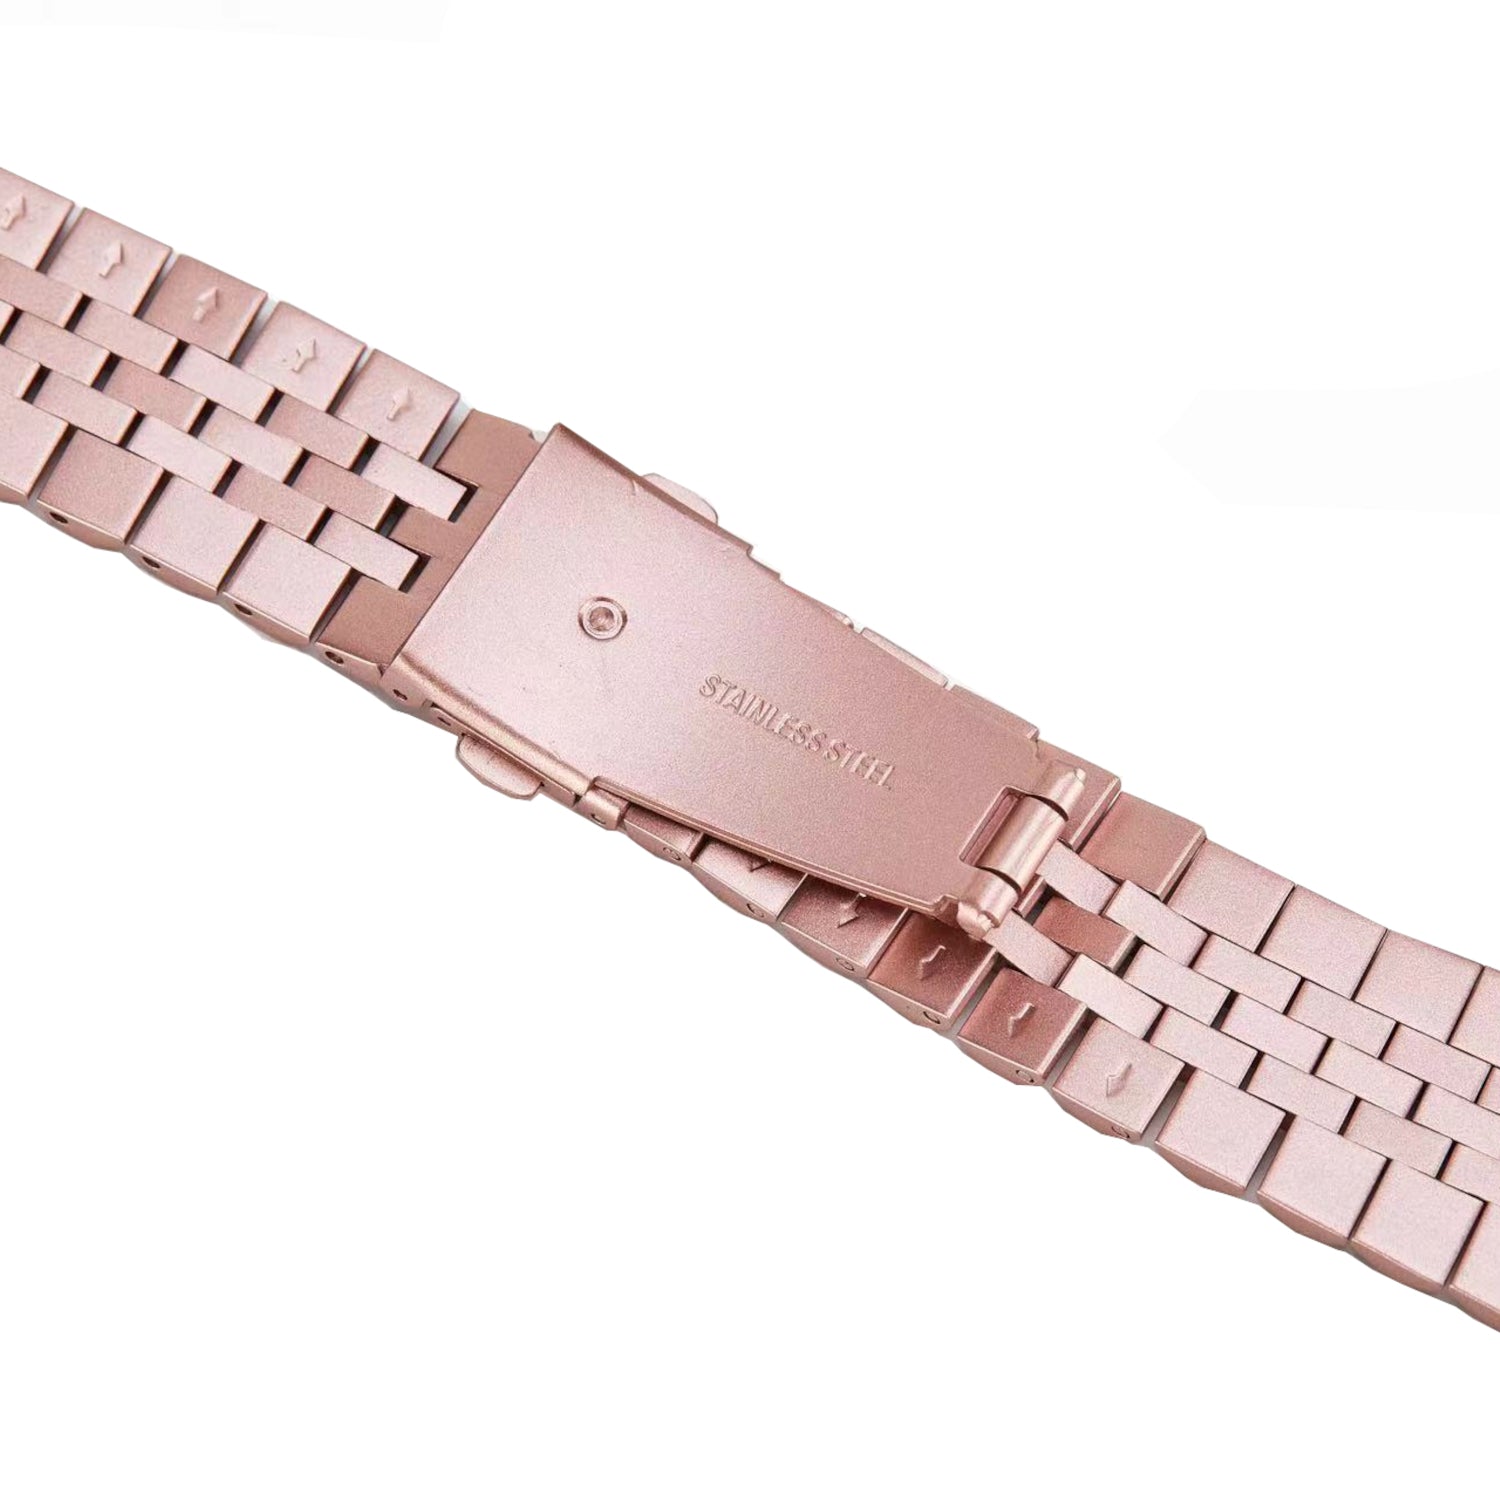 Stainless Steel Link Bracelet Band - The Perth in Rose Gold - Compatible with Apple Watch Size 38mm to 41mm - Friendie Pty Ltd